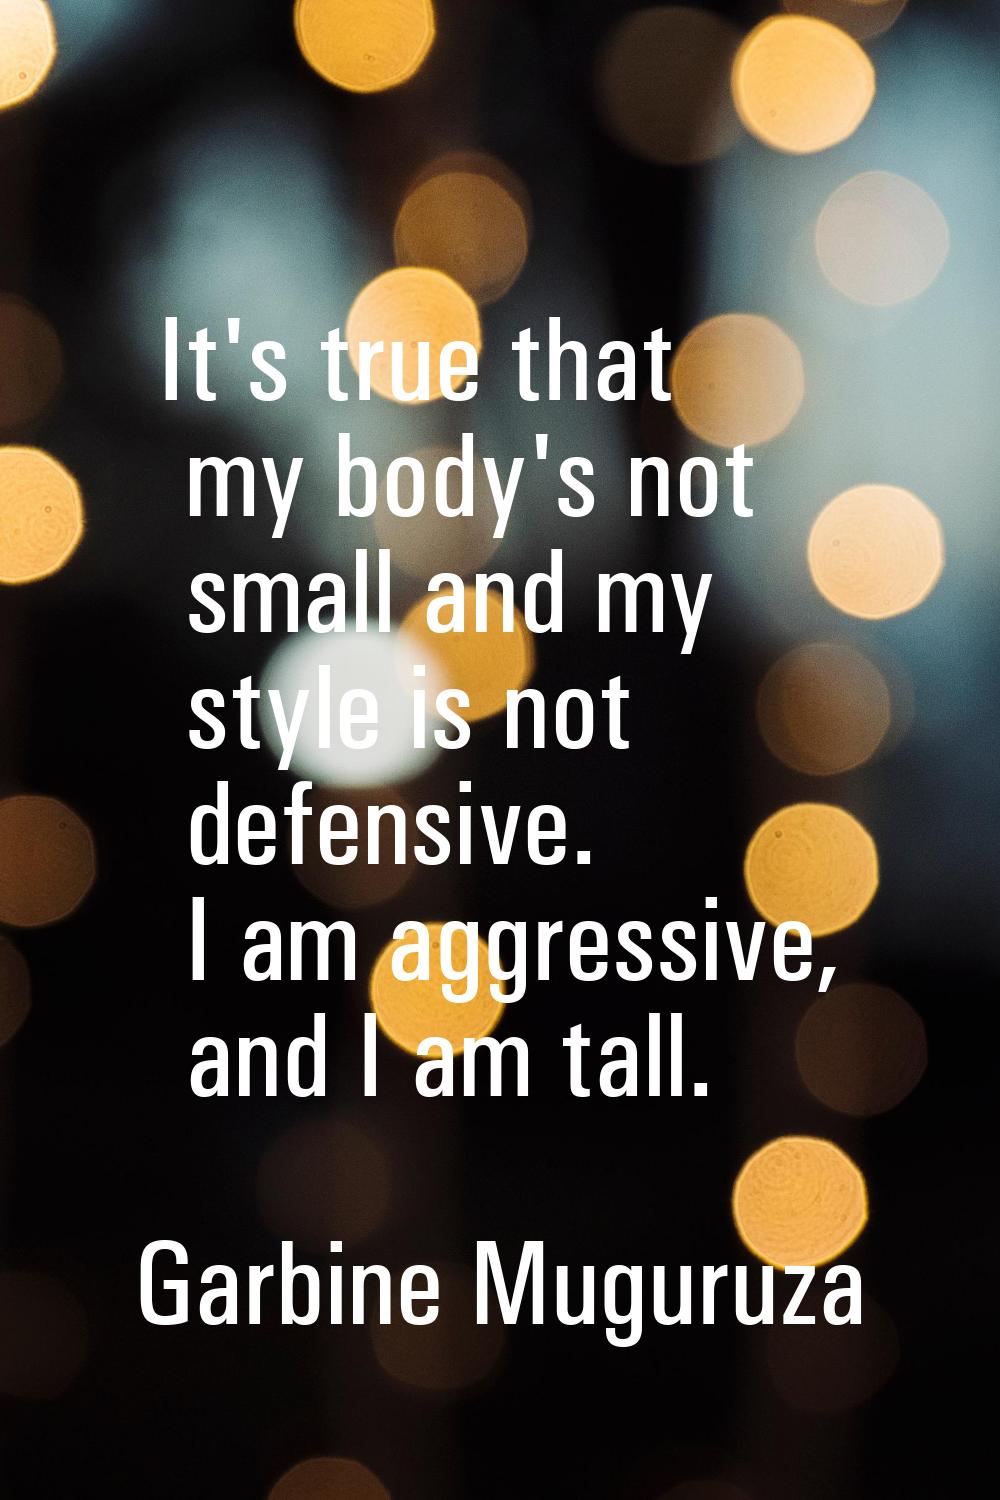 It's true that my body's not small and my style is not defensive. I am aggressive, and I am tall.